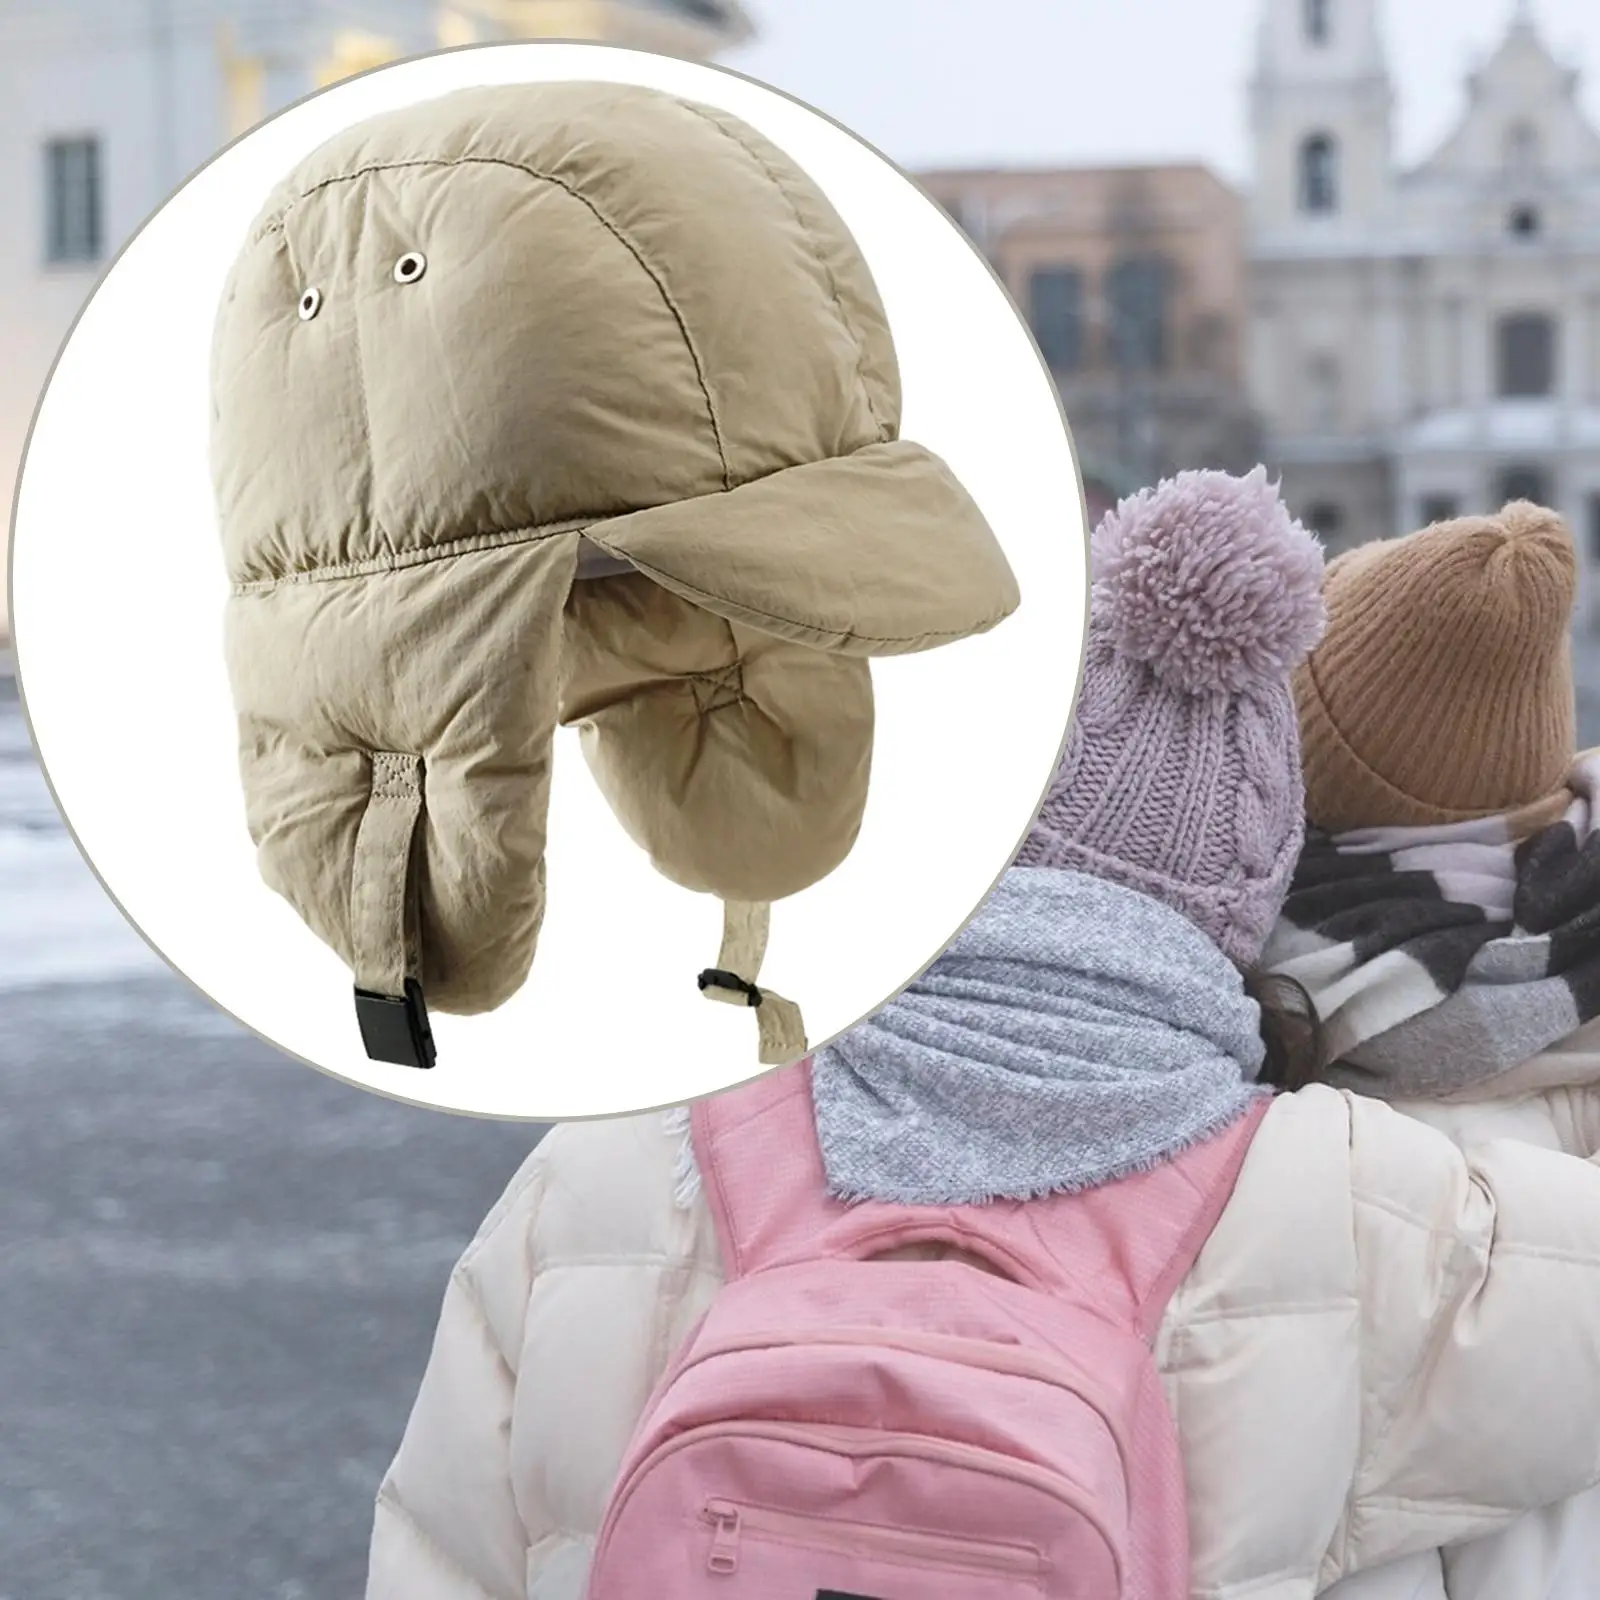 Hat with Earflaps Peaked Hat Comfortable Windproof for Men Women Cap Winter Hat for Skating Snow Sports Biking Skiing Female